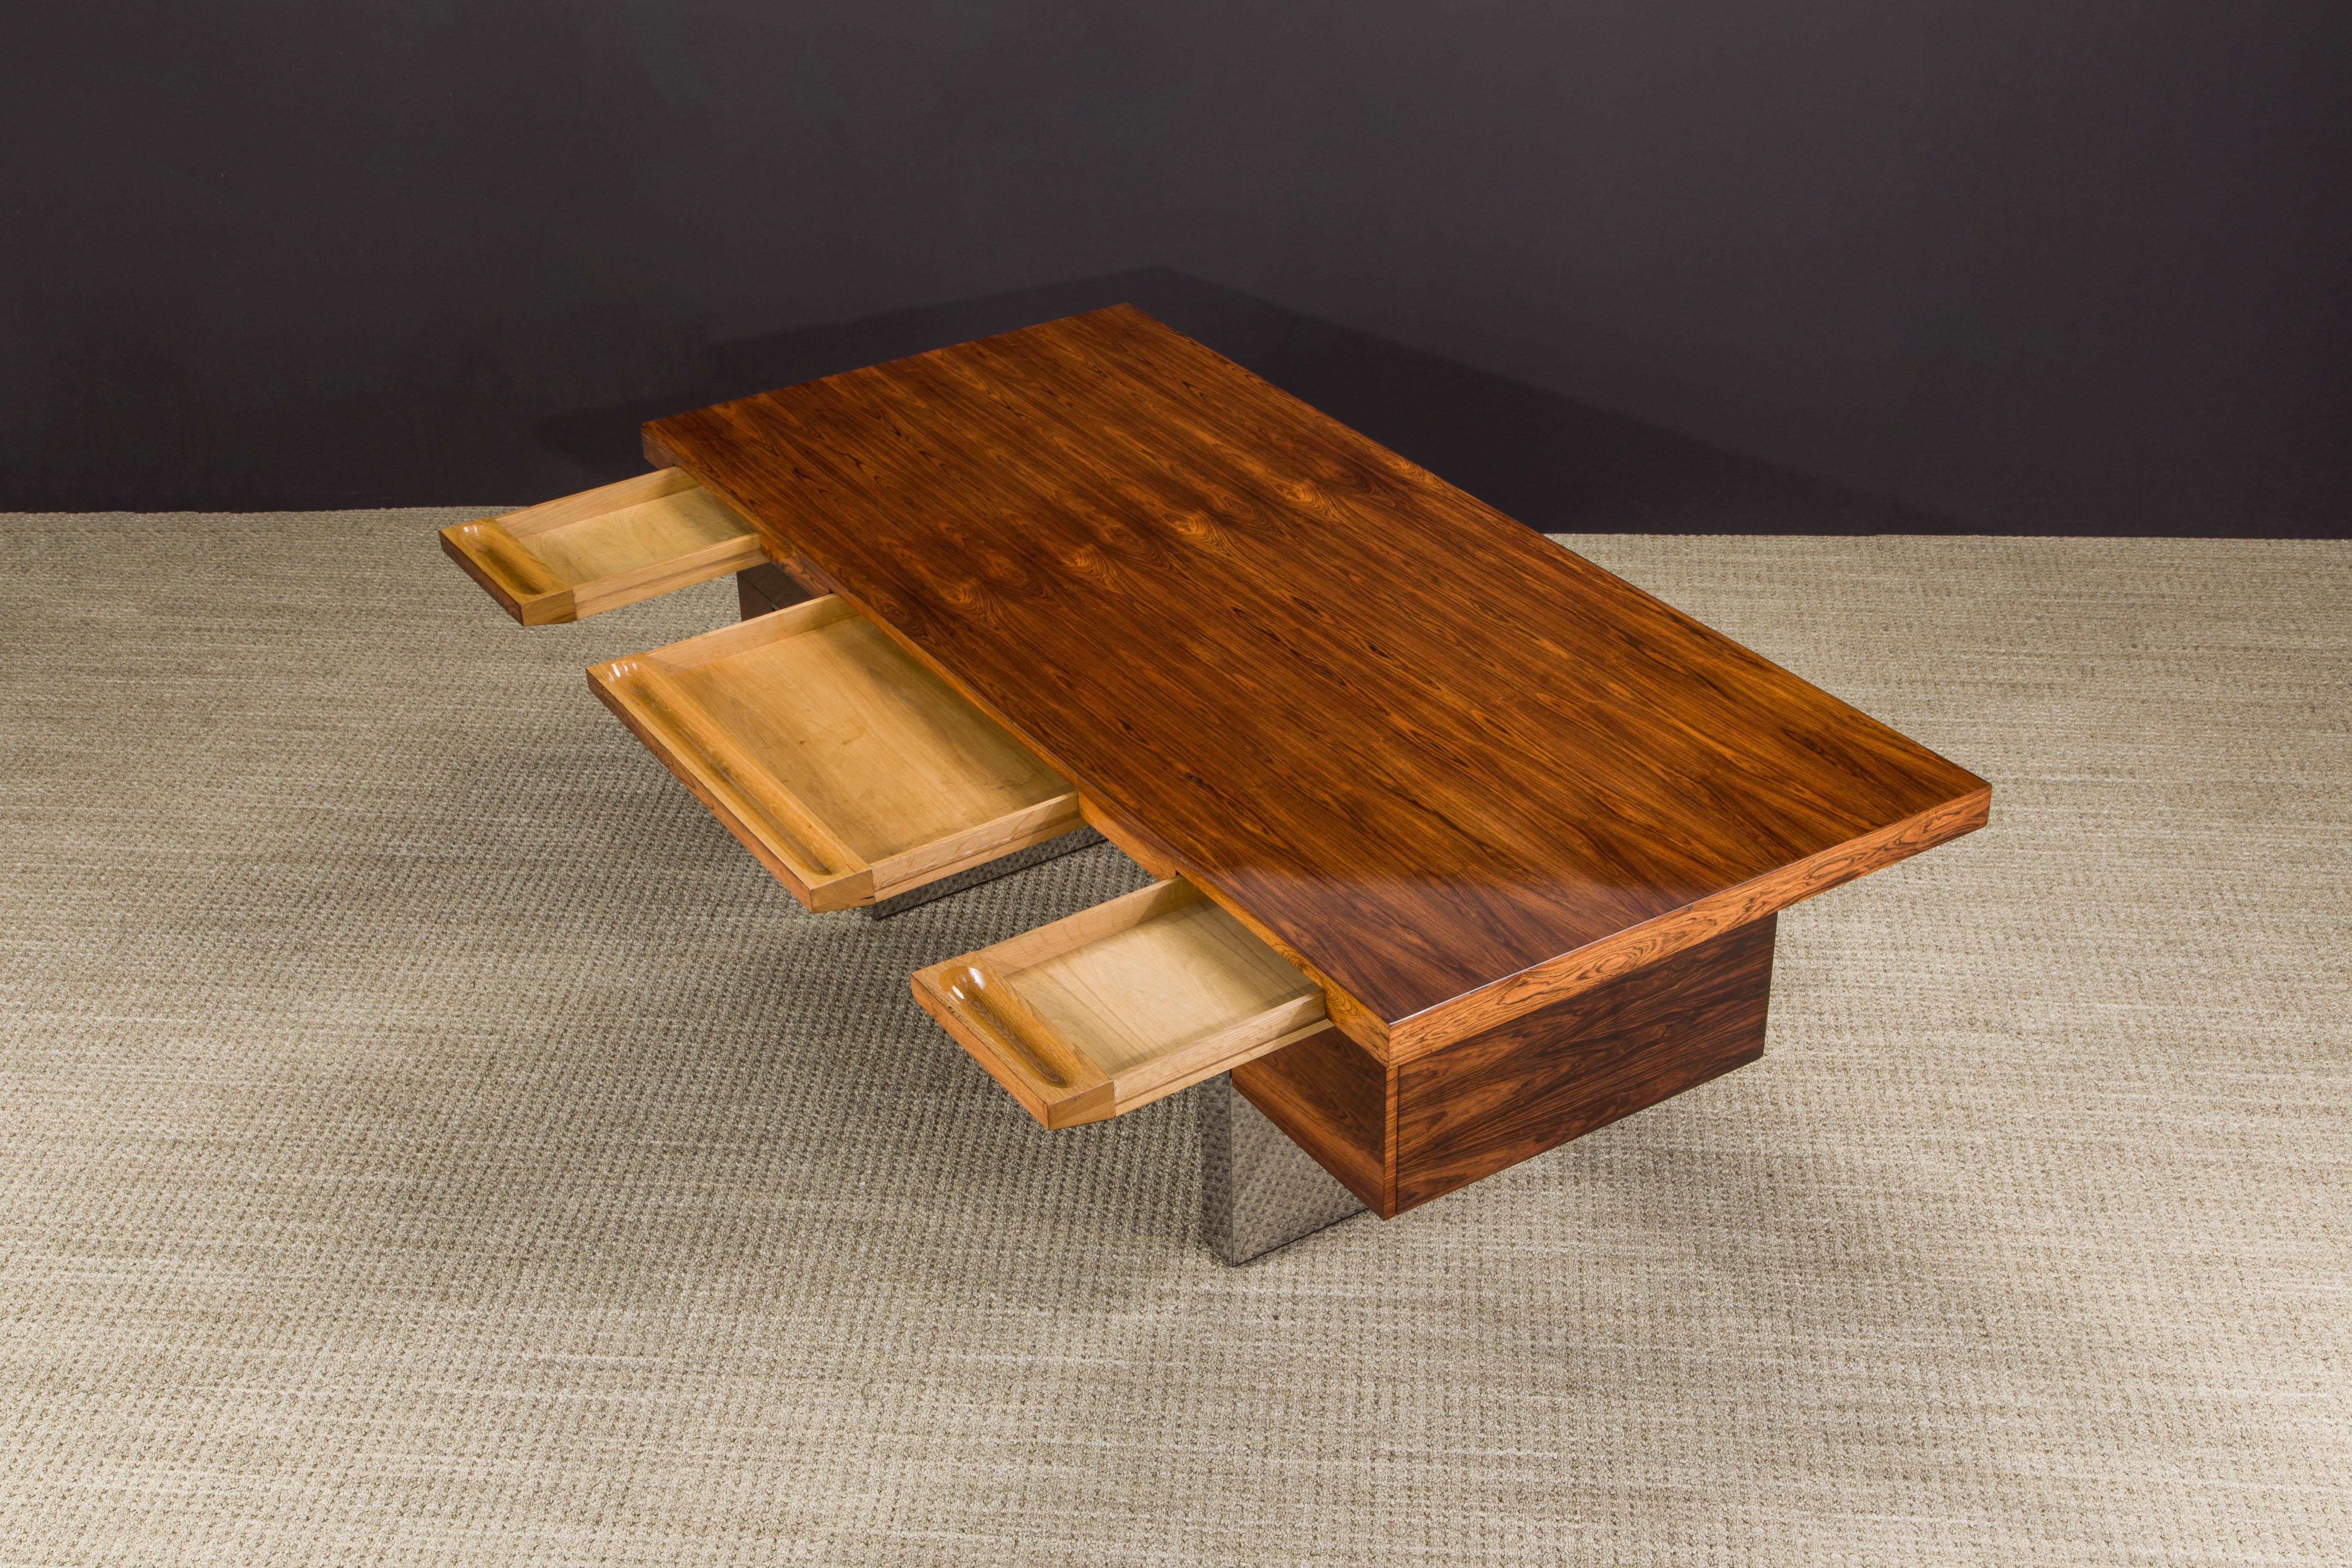 Late 20th Century Rosewood Floating Executive Desk by Roger Sprunger for Dunbar, c 1970, Signed